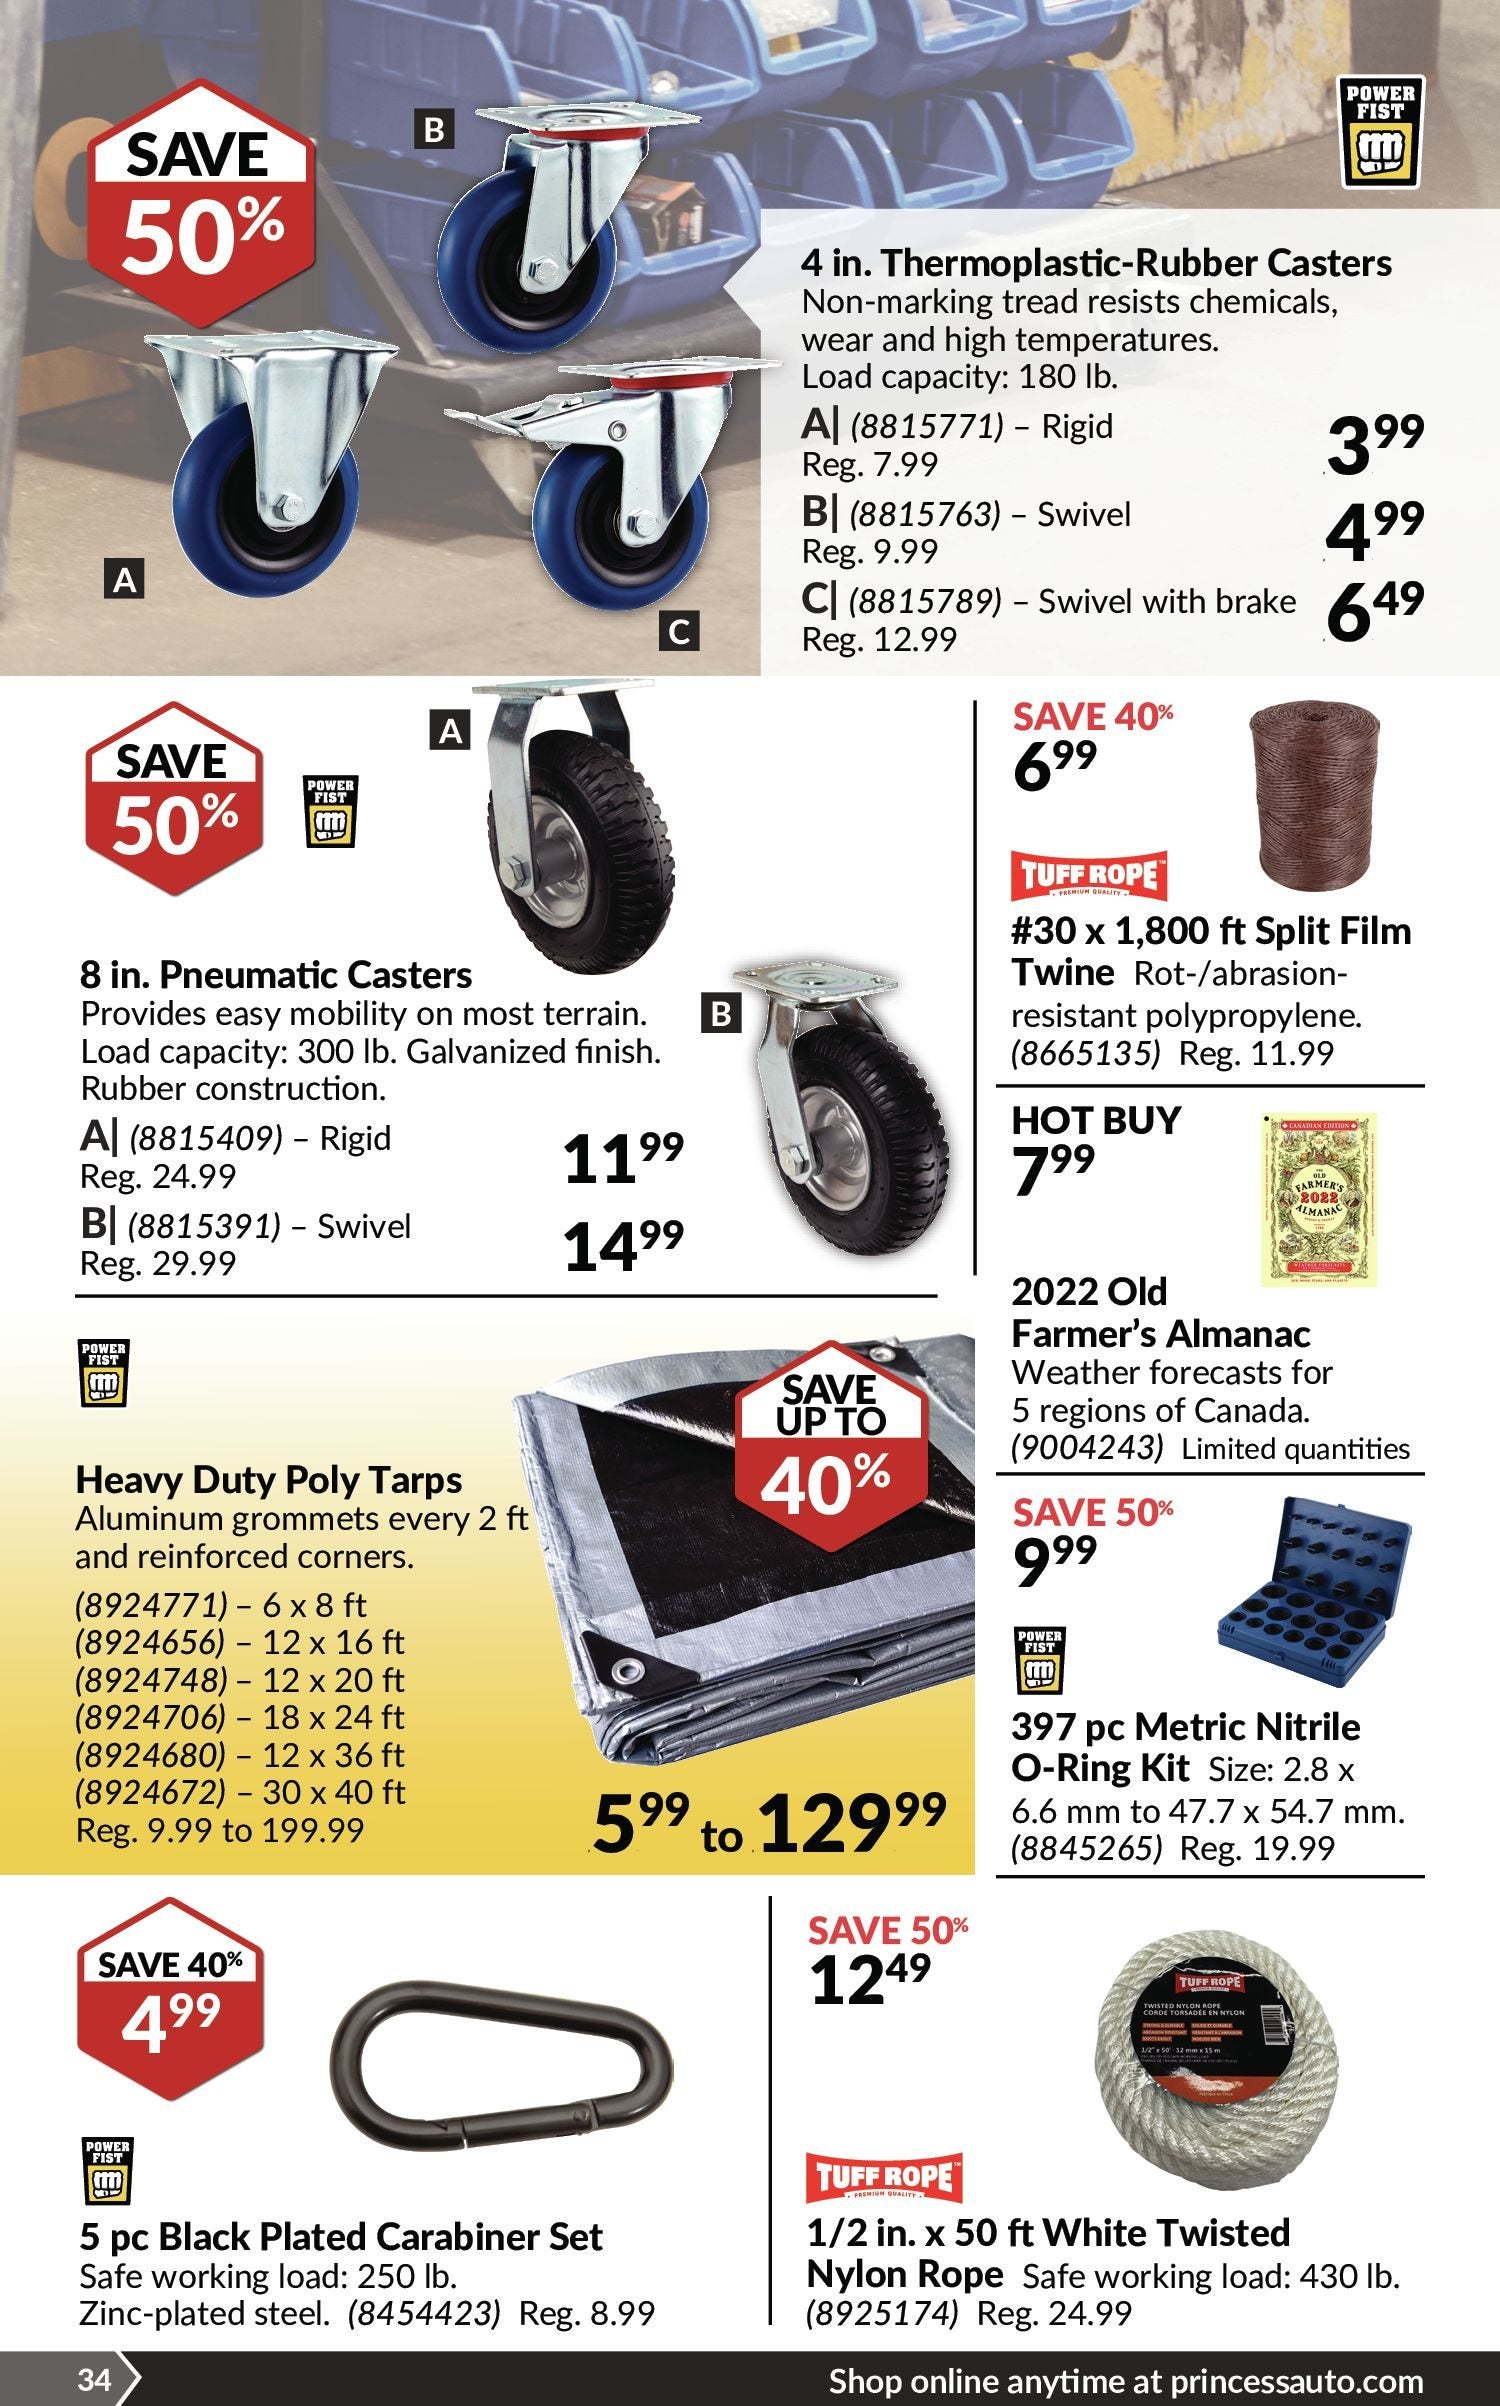 Princess Auto Weekly Flyer - 2 Week Sale - Ready For Indoor